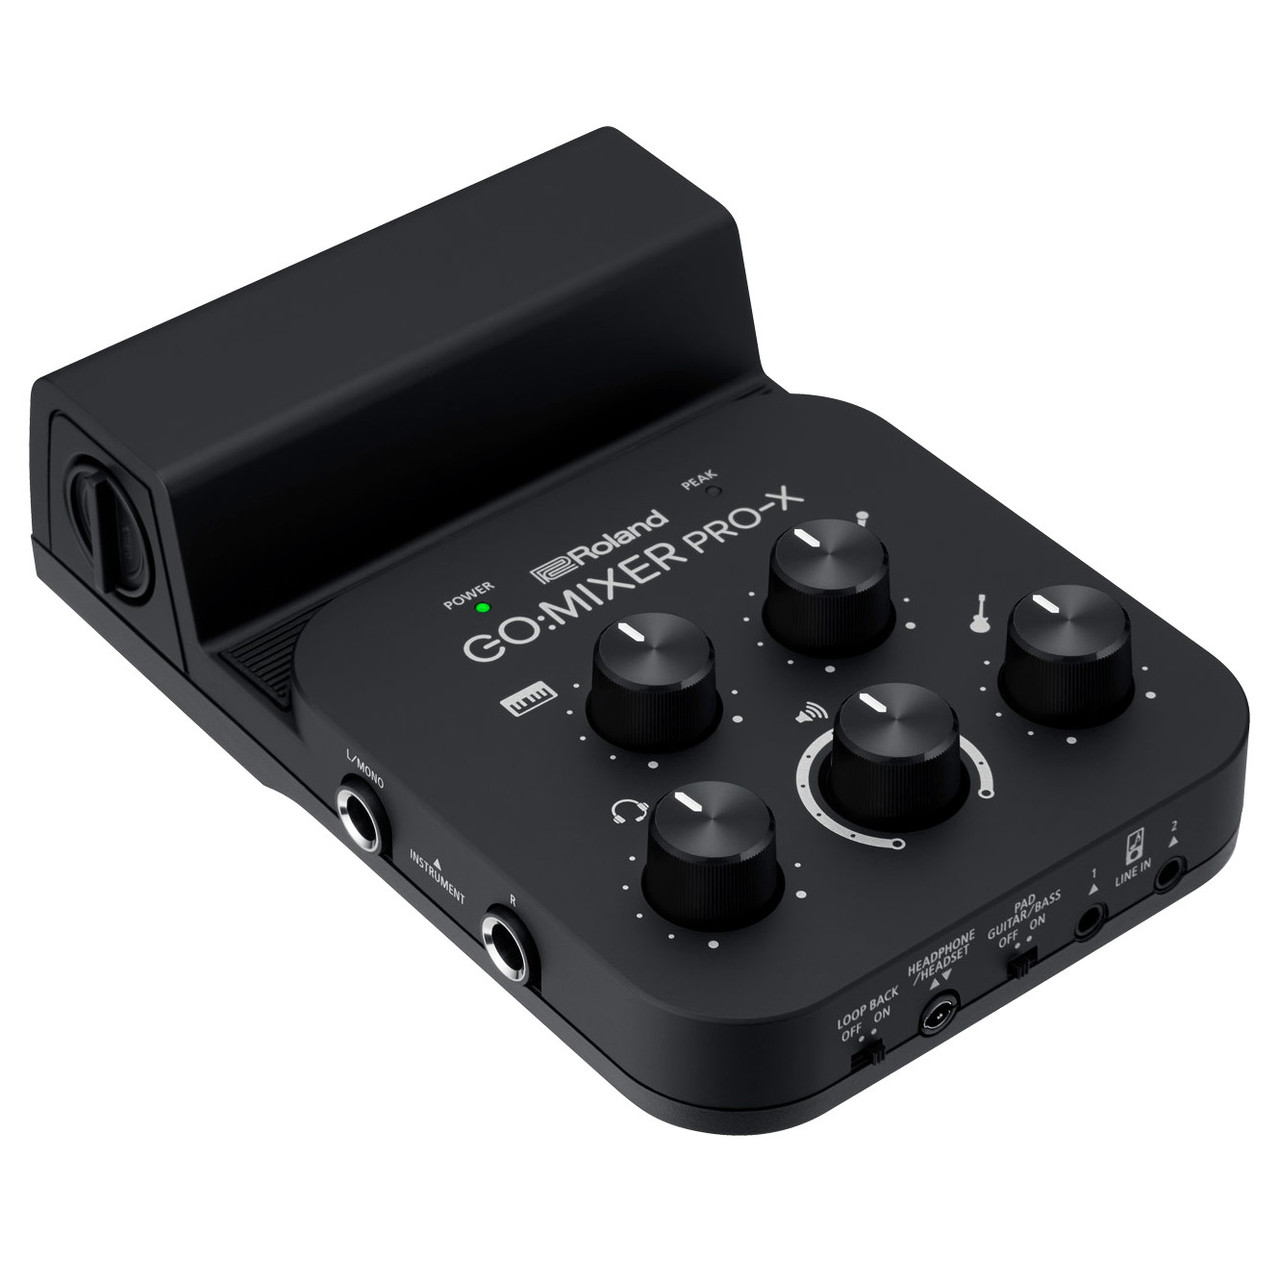  Roland GO:MIXER PRO-X Audio Mixer for Smartphones, Connect and  Mix up to 7 Audio Sources